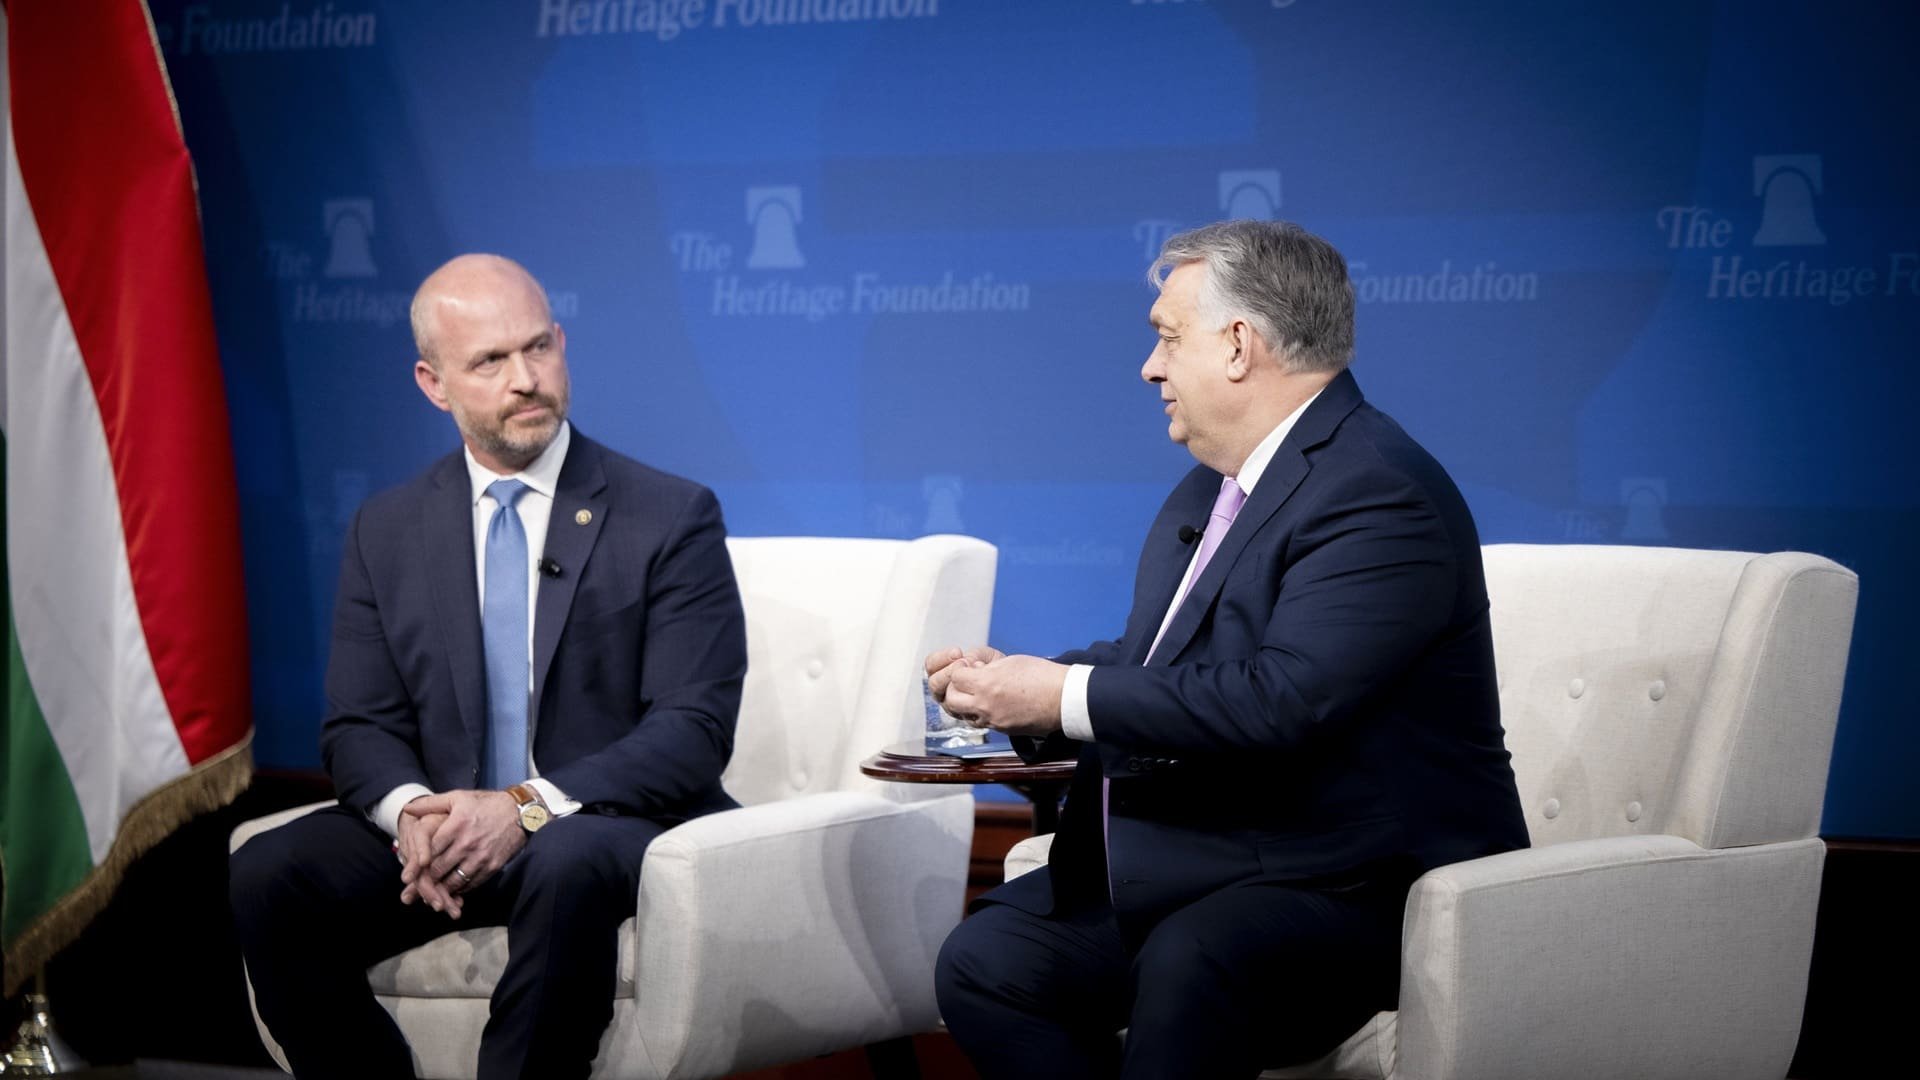 President of the Heritage Foundation, Kevin Roberts, and the Prime Minister of Hungary, Viktor Orbán, during a closed discussion organized by the Heritage Foundation in the USA. Photo: hungarianconservative.com